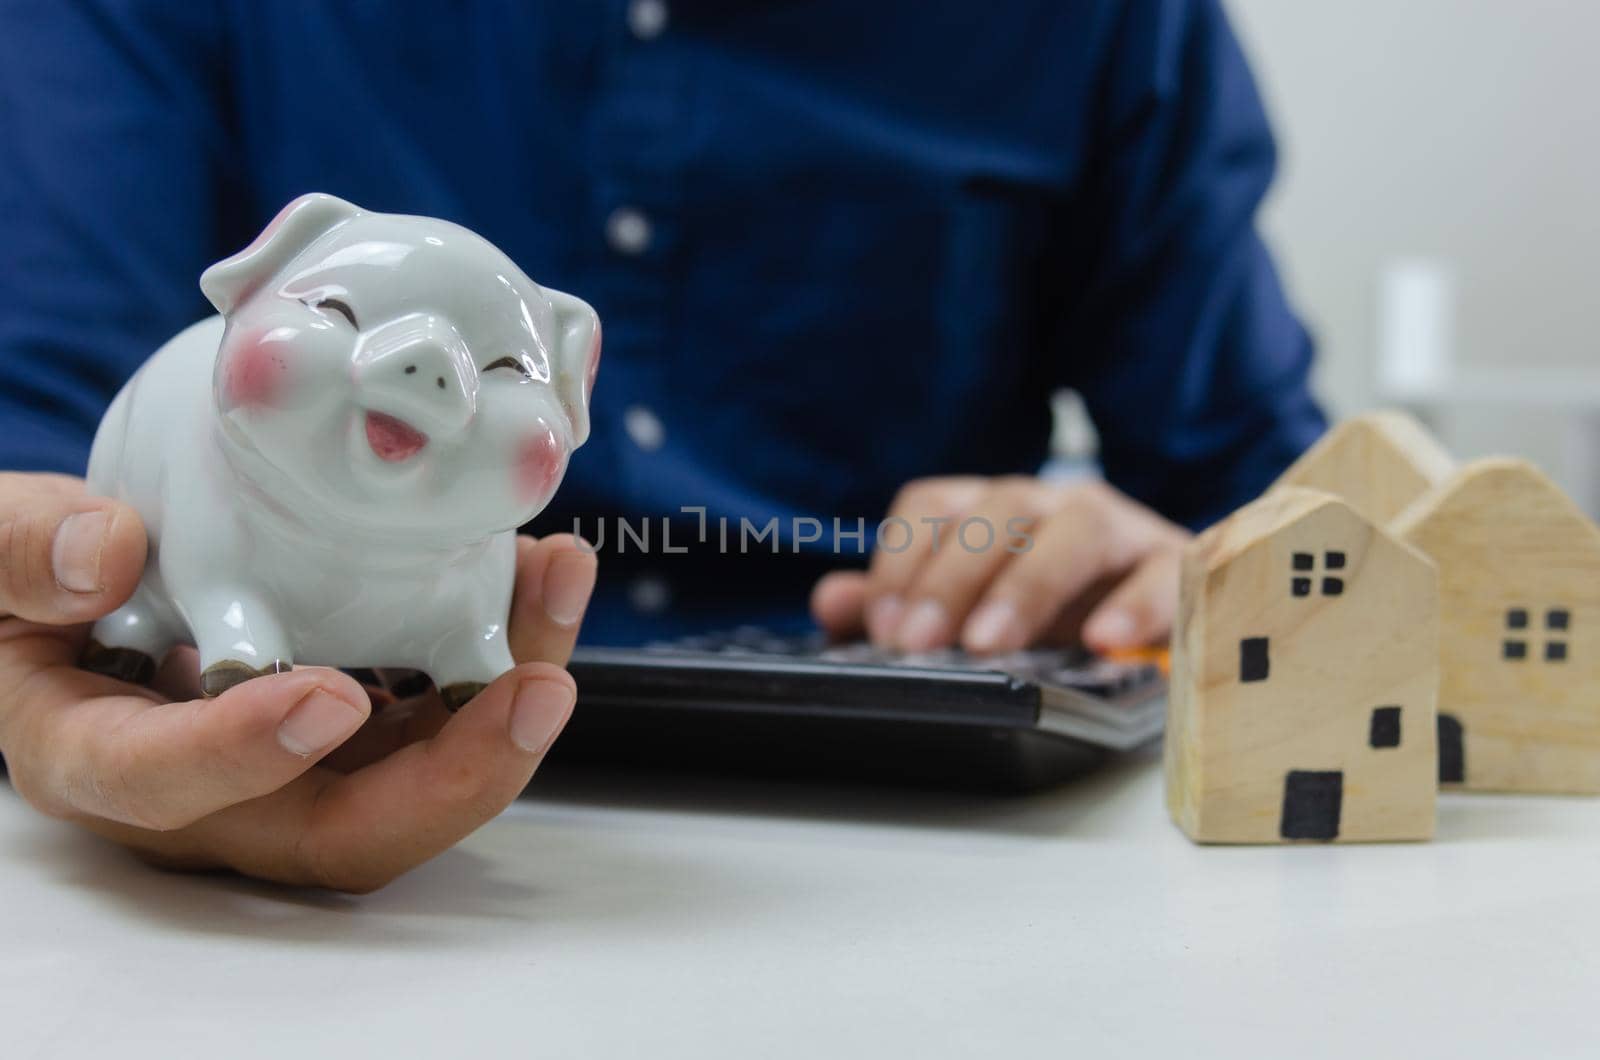 Saving a piggy bank for real estate and housing purchases. Business finance investments taxes or retirement money and concept insurance. by aoo3771